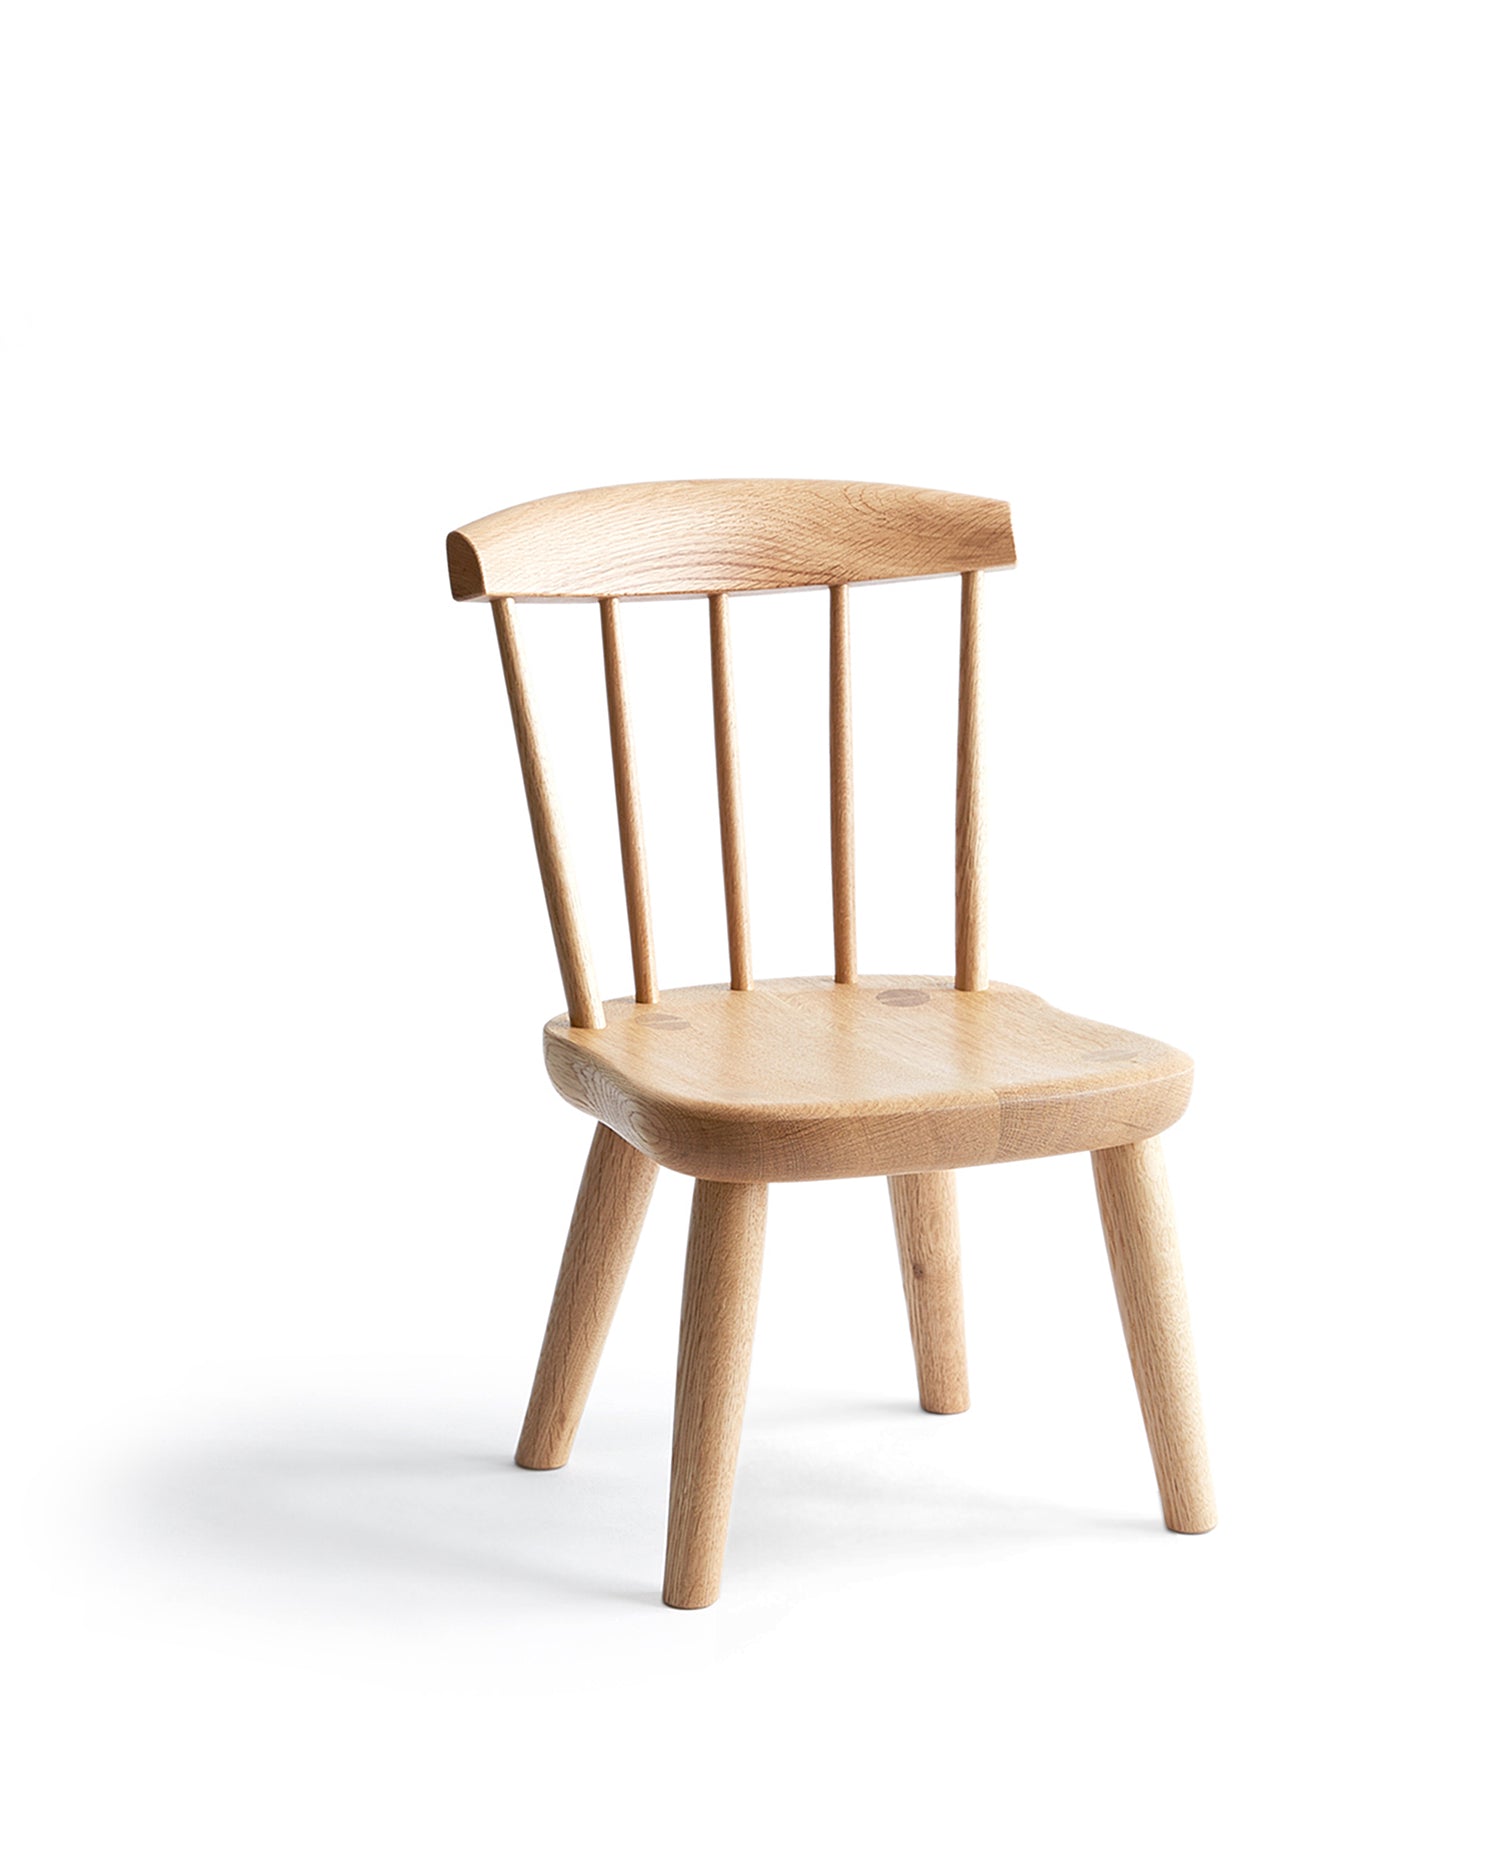 Children's Chair - Spindle Back